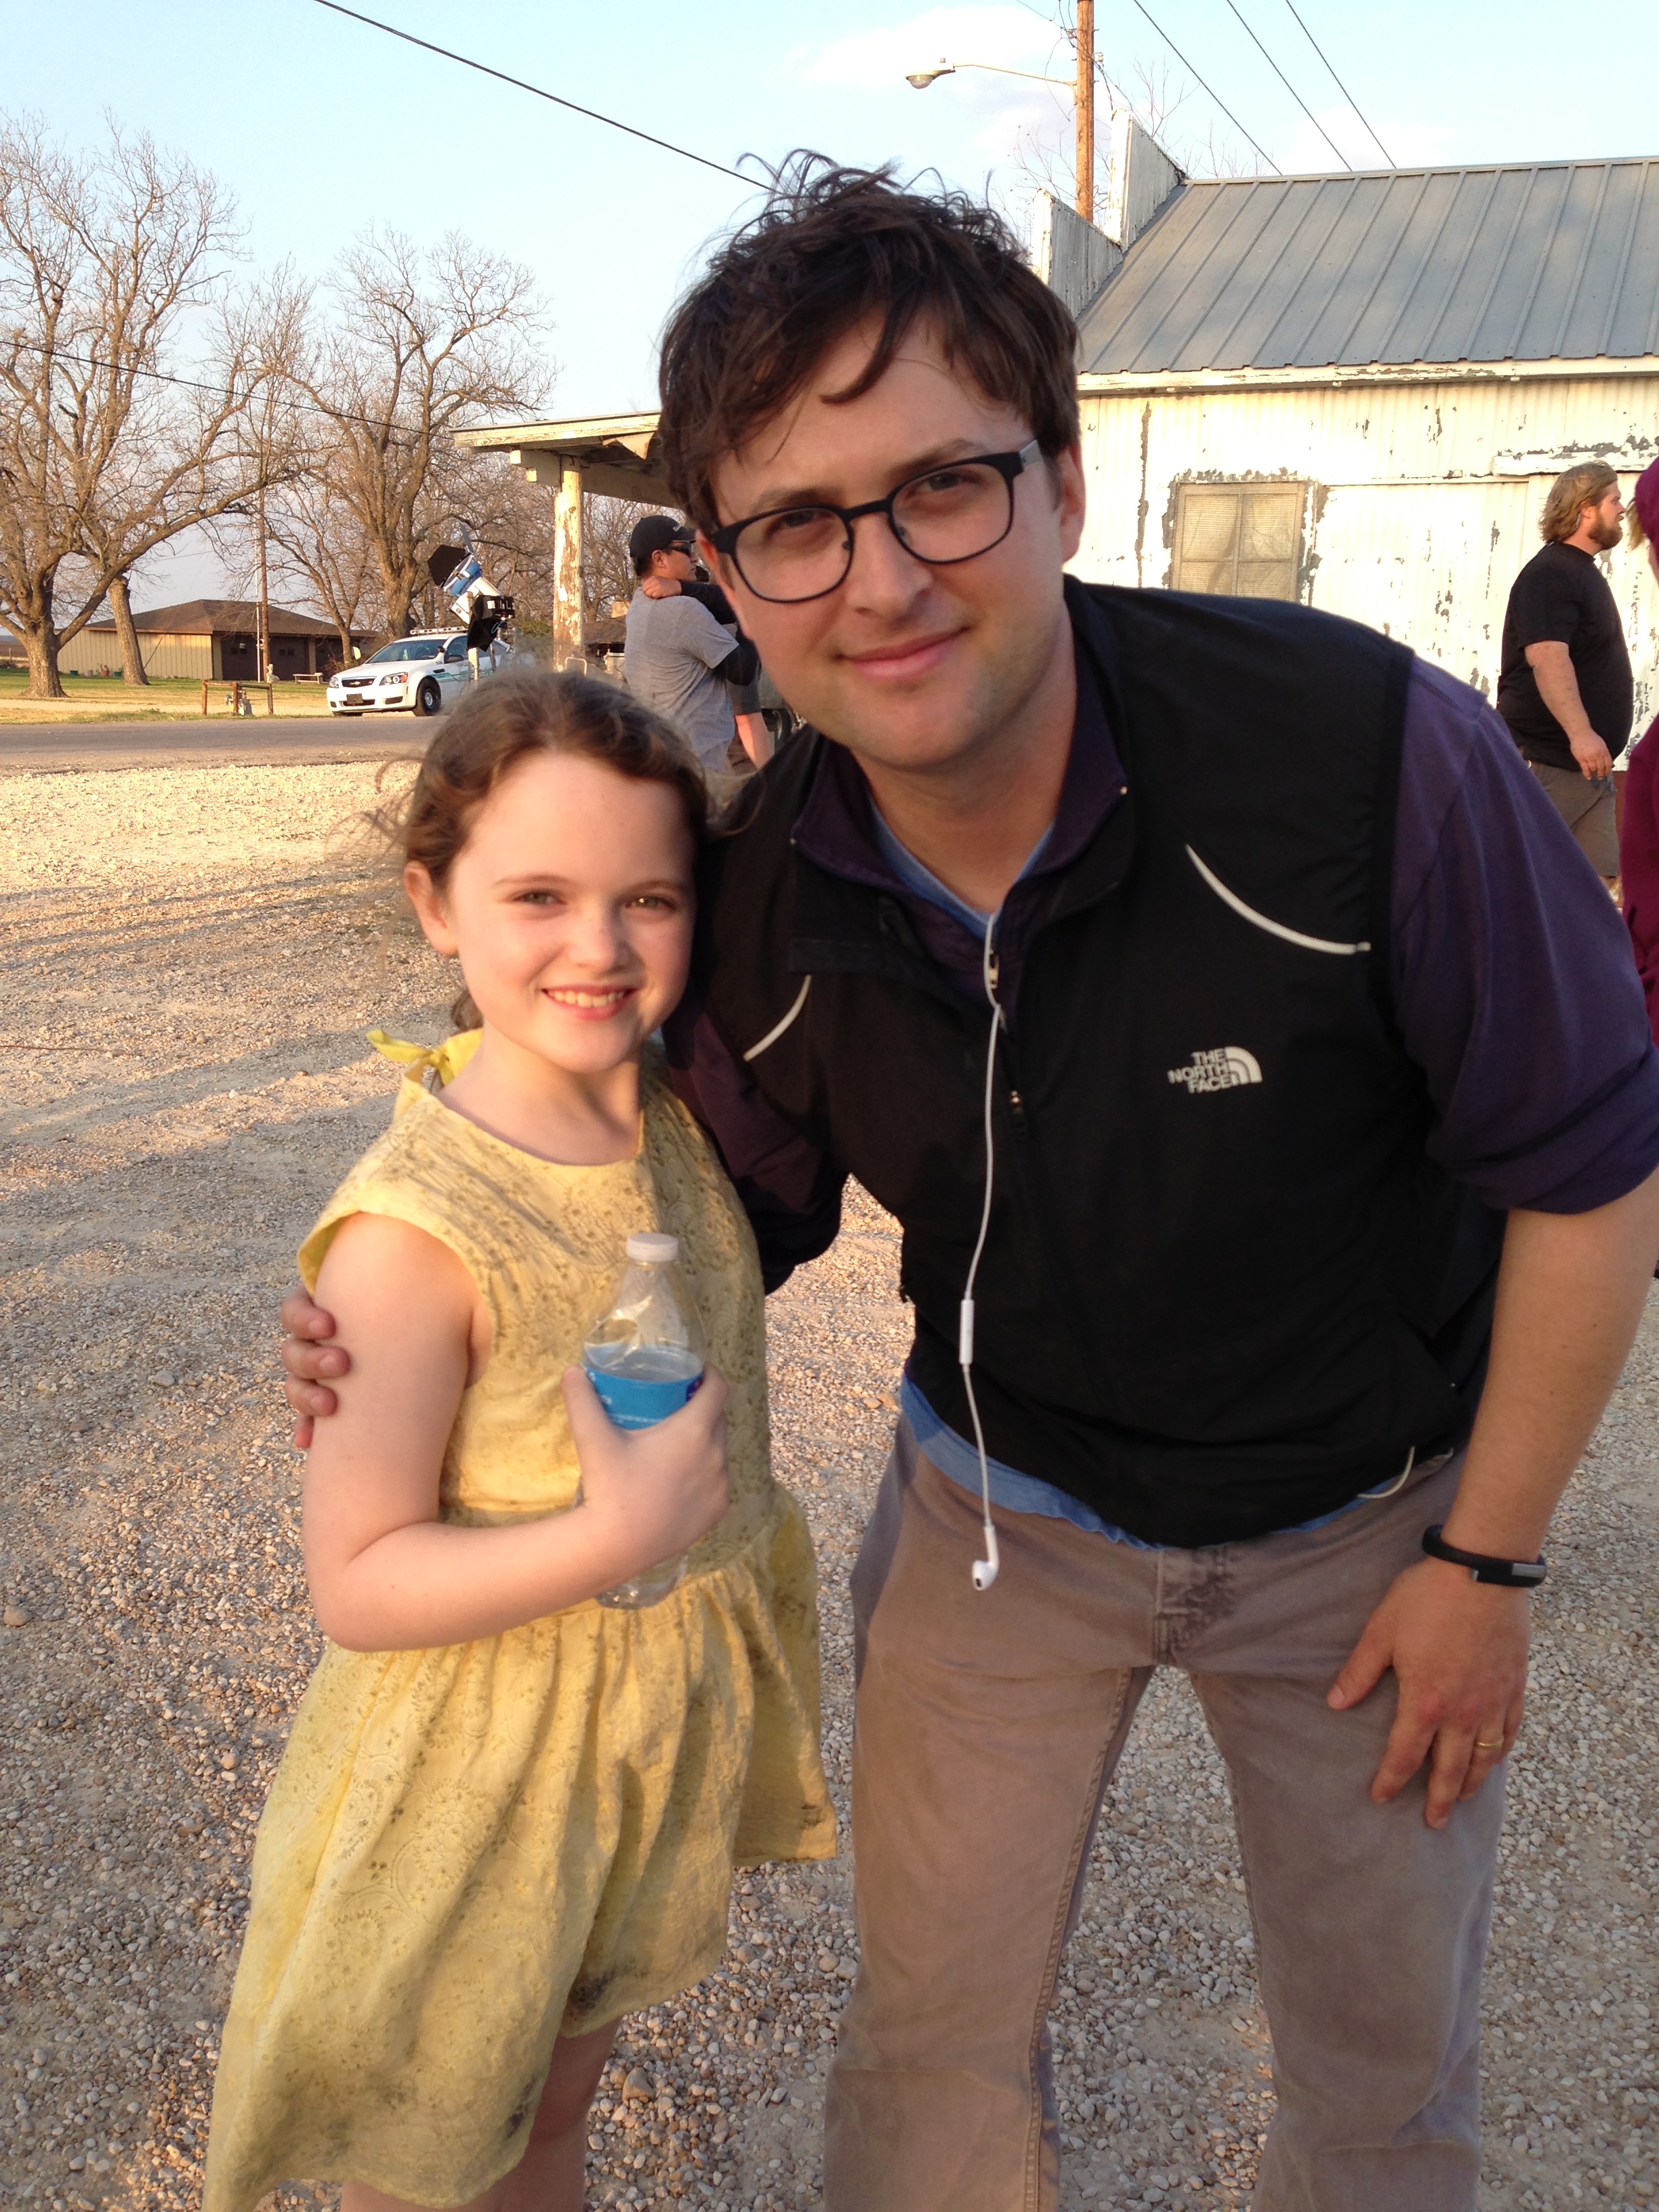 Teagan and 'Lost in the Sun' writer/director Trey Nelson.